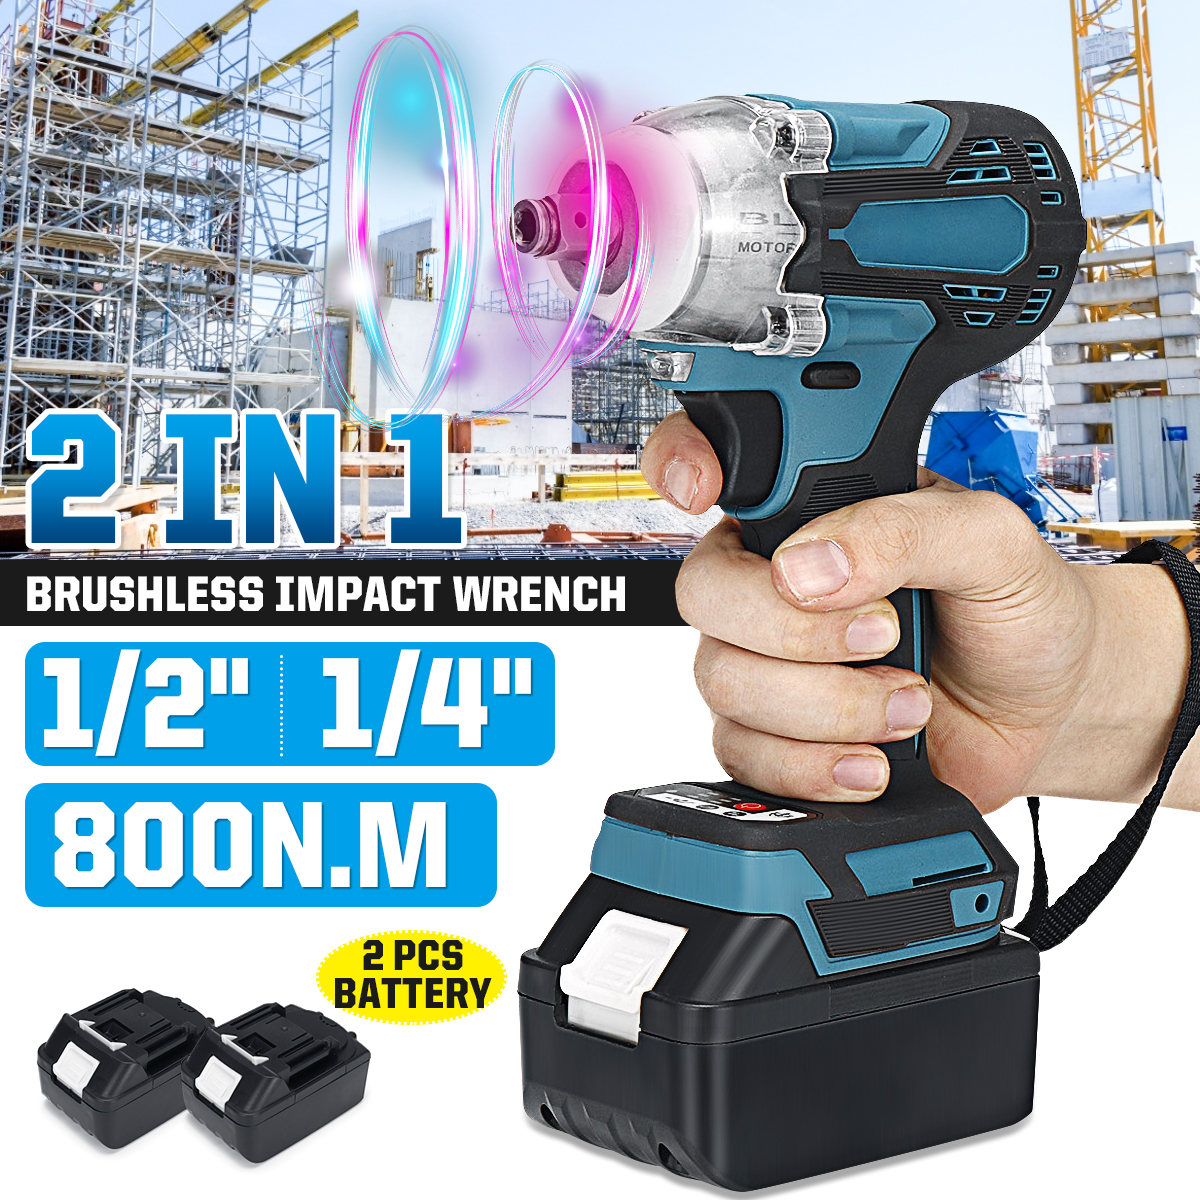 2-in1-18V-800Nm-Electric-Wrench-Screwdriver-Brushless-Cordless-Electric-12Wrench-14Screwdriver-W-2-B-1806148-1